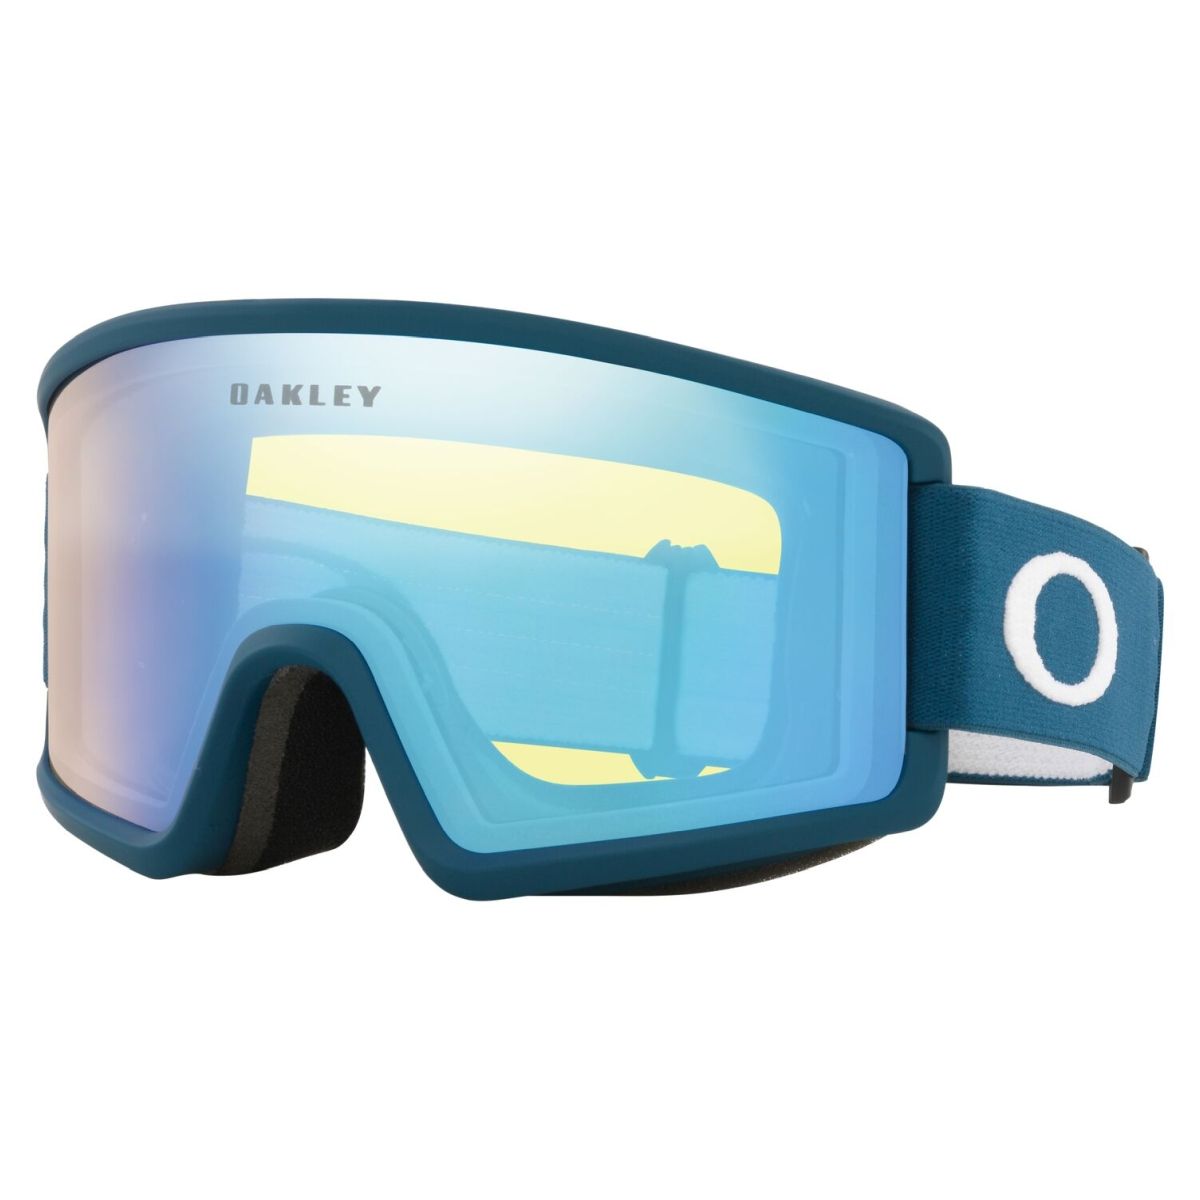 OAKLEY TARGET LINE M SNOW GOGGLES 7121/10/00